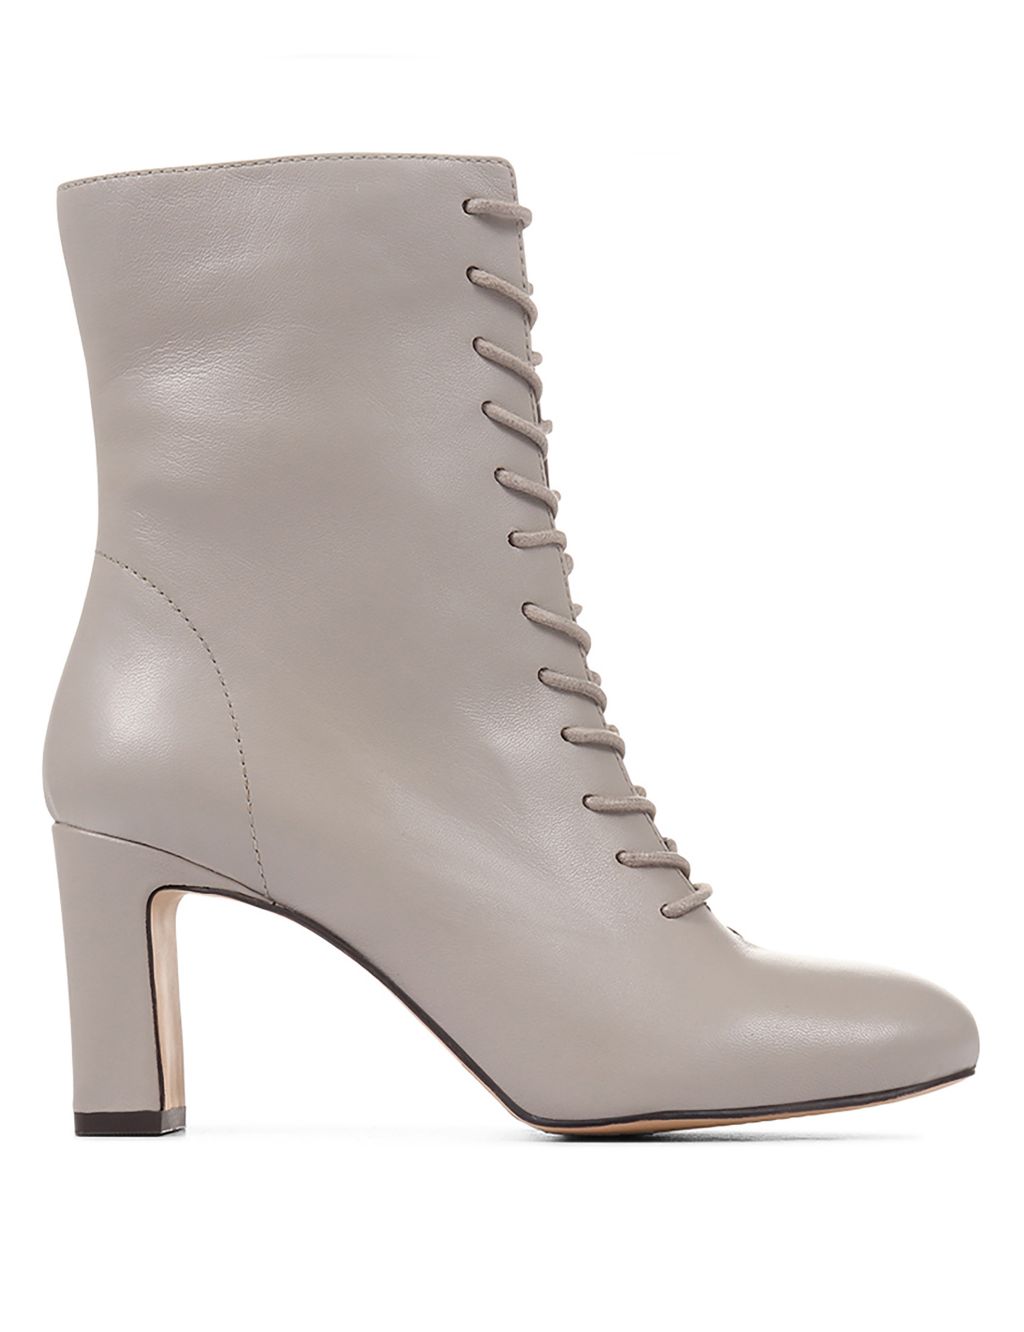 Leather Lace Up Block Heel Ankle Boots image 4